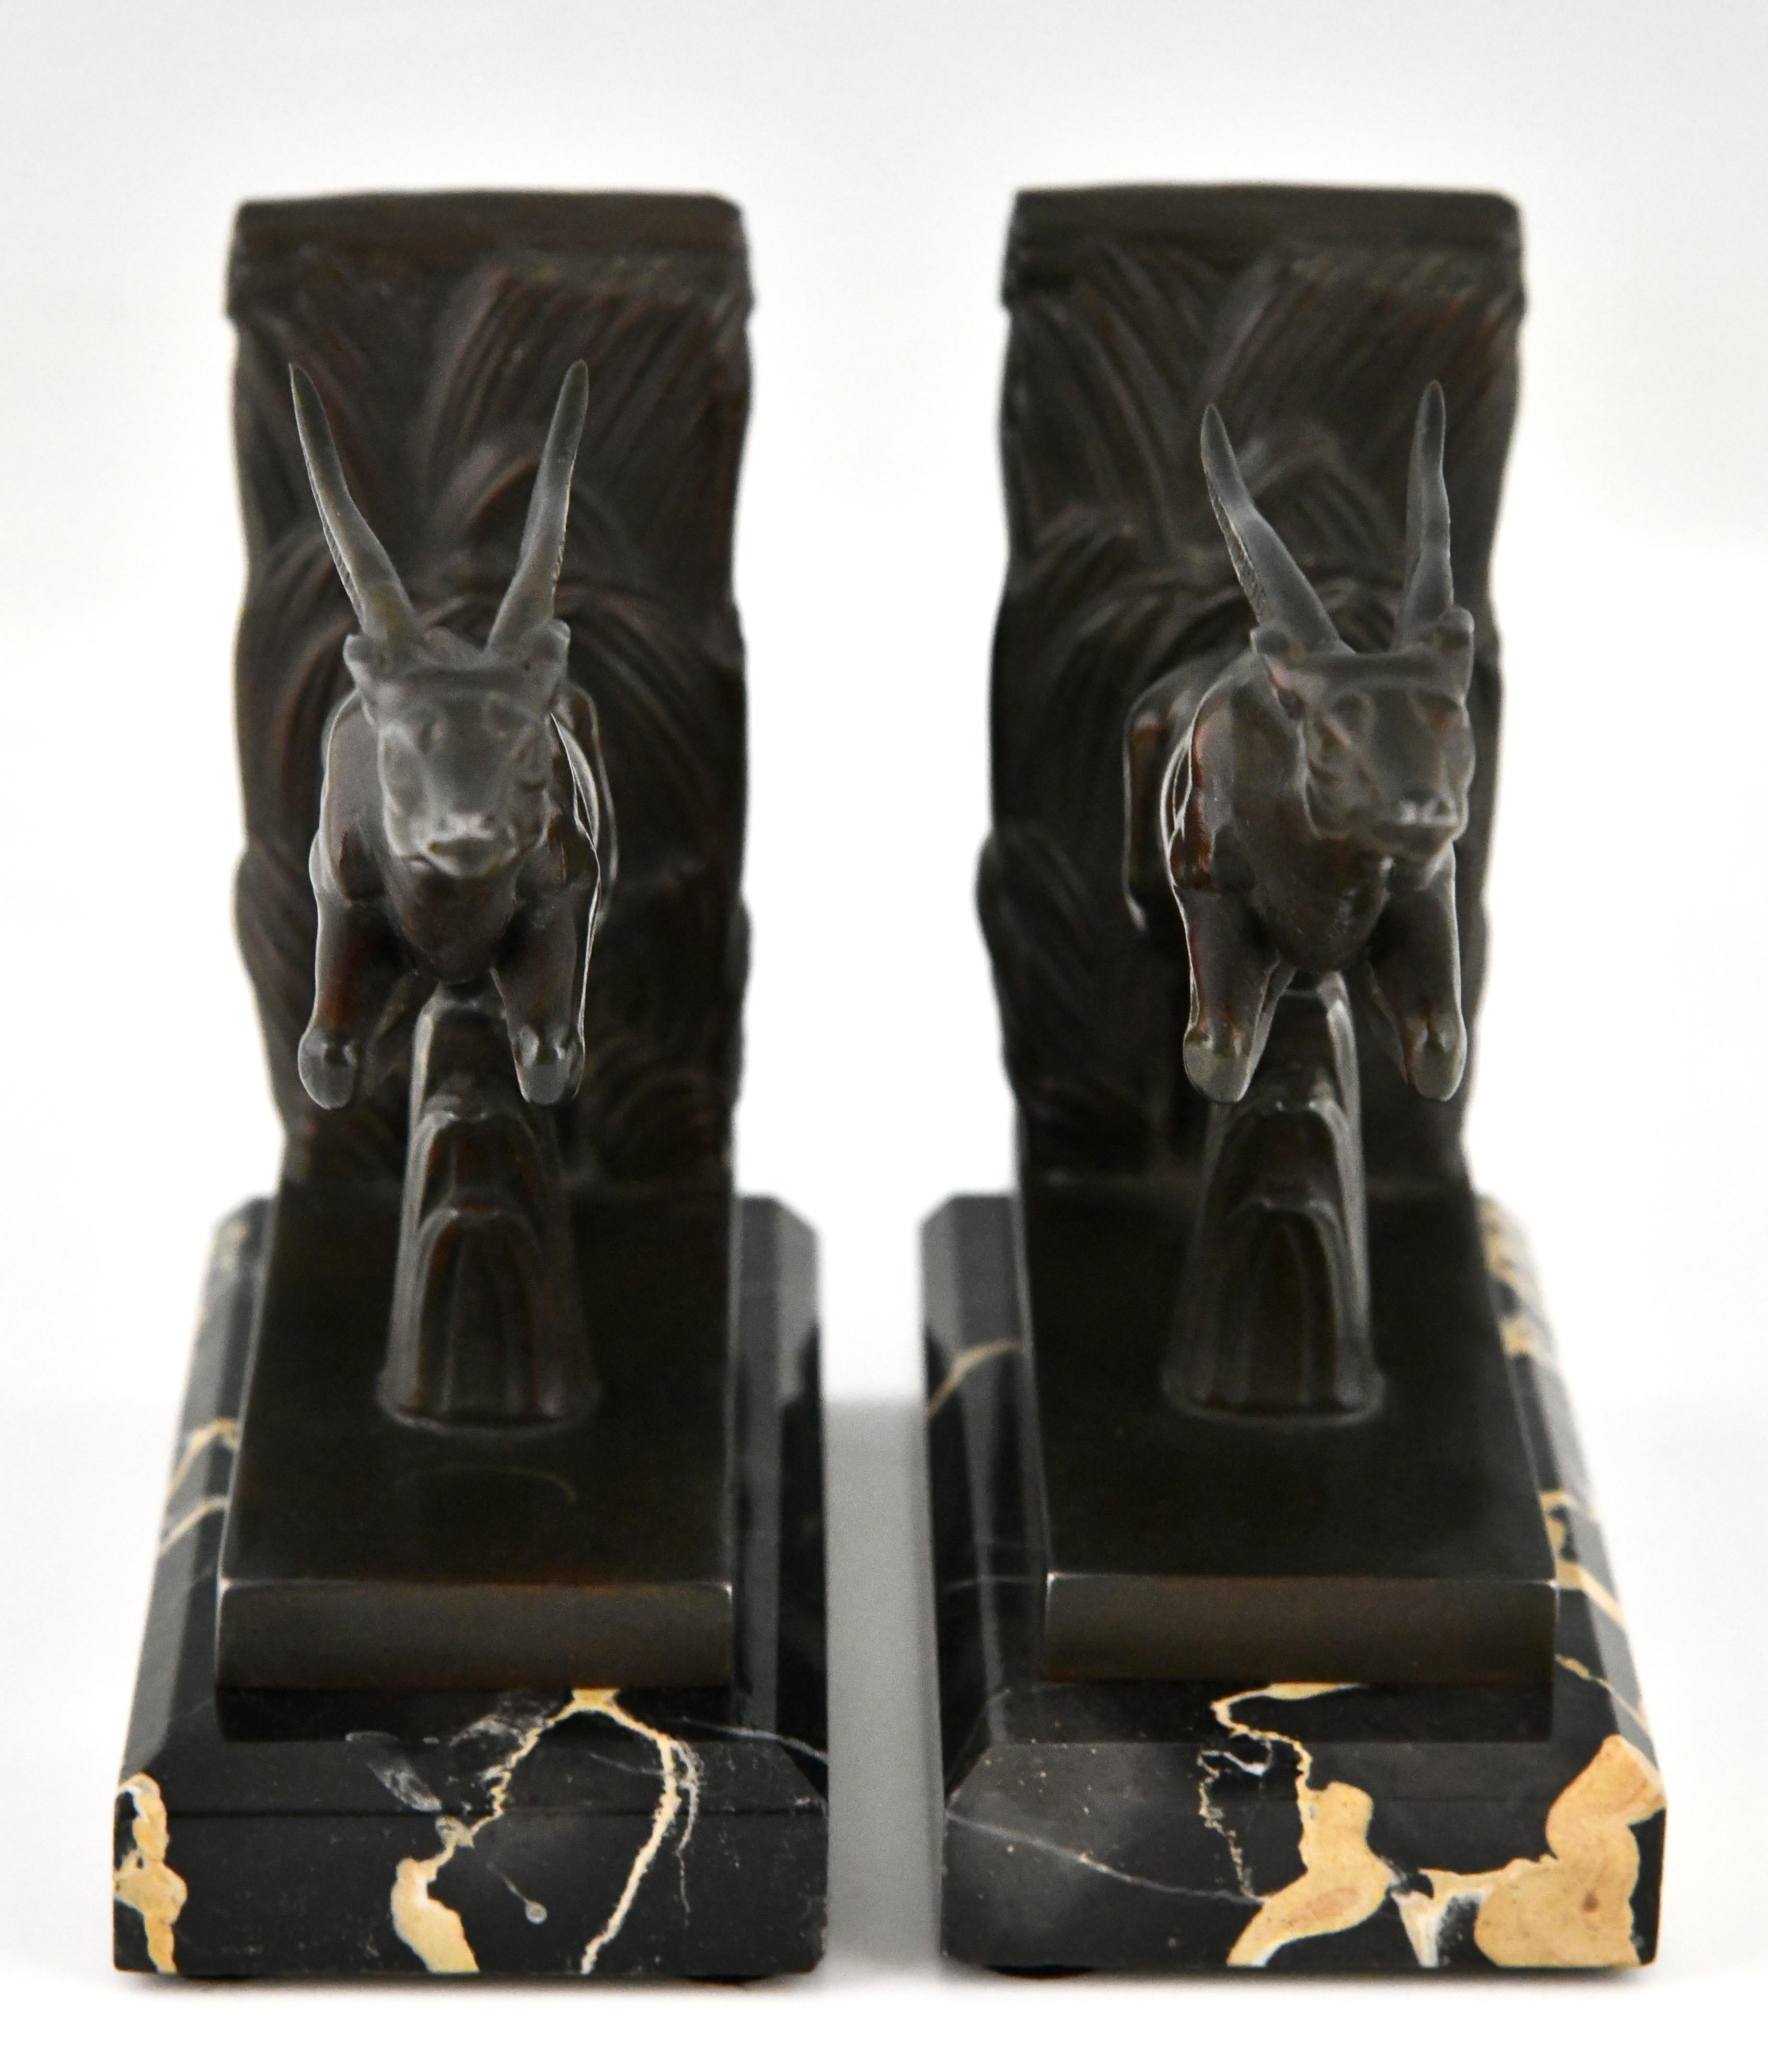 French  Art Deco Leaping Deer Bookends by Max Le Verrier 1930 France For Sale